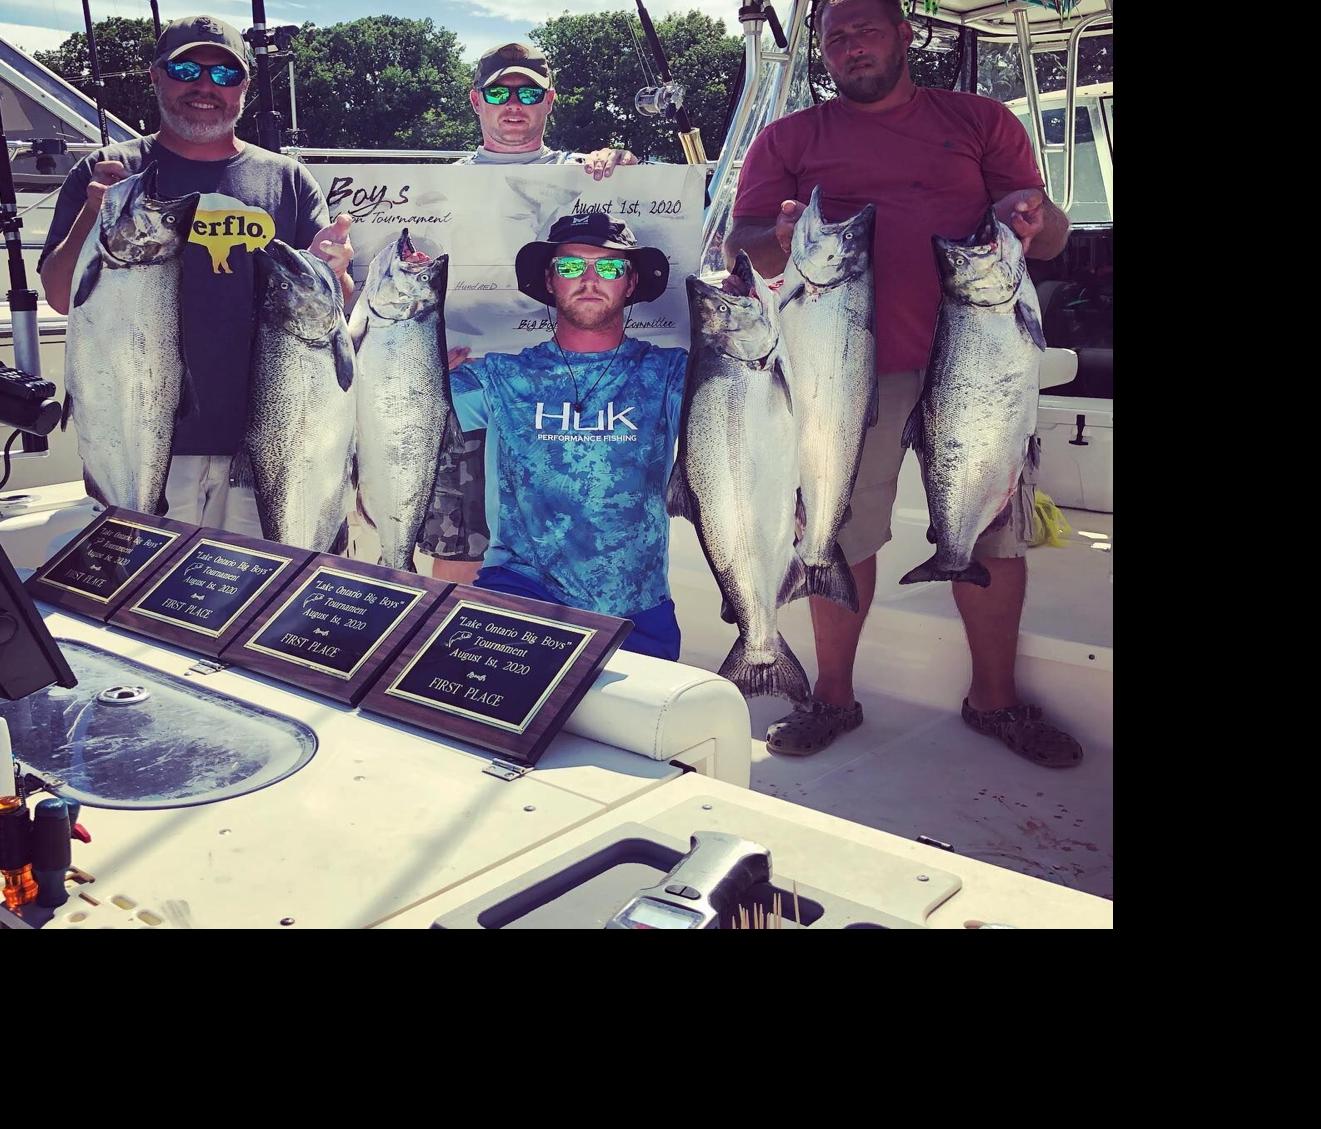 Dublin Up wins first Big Boys fishing tournament and other